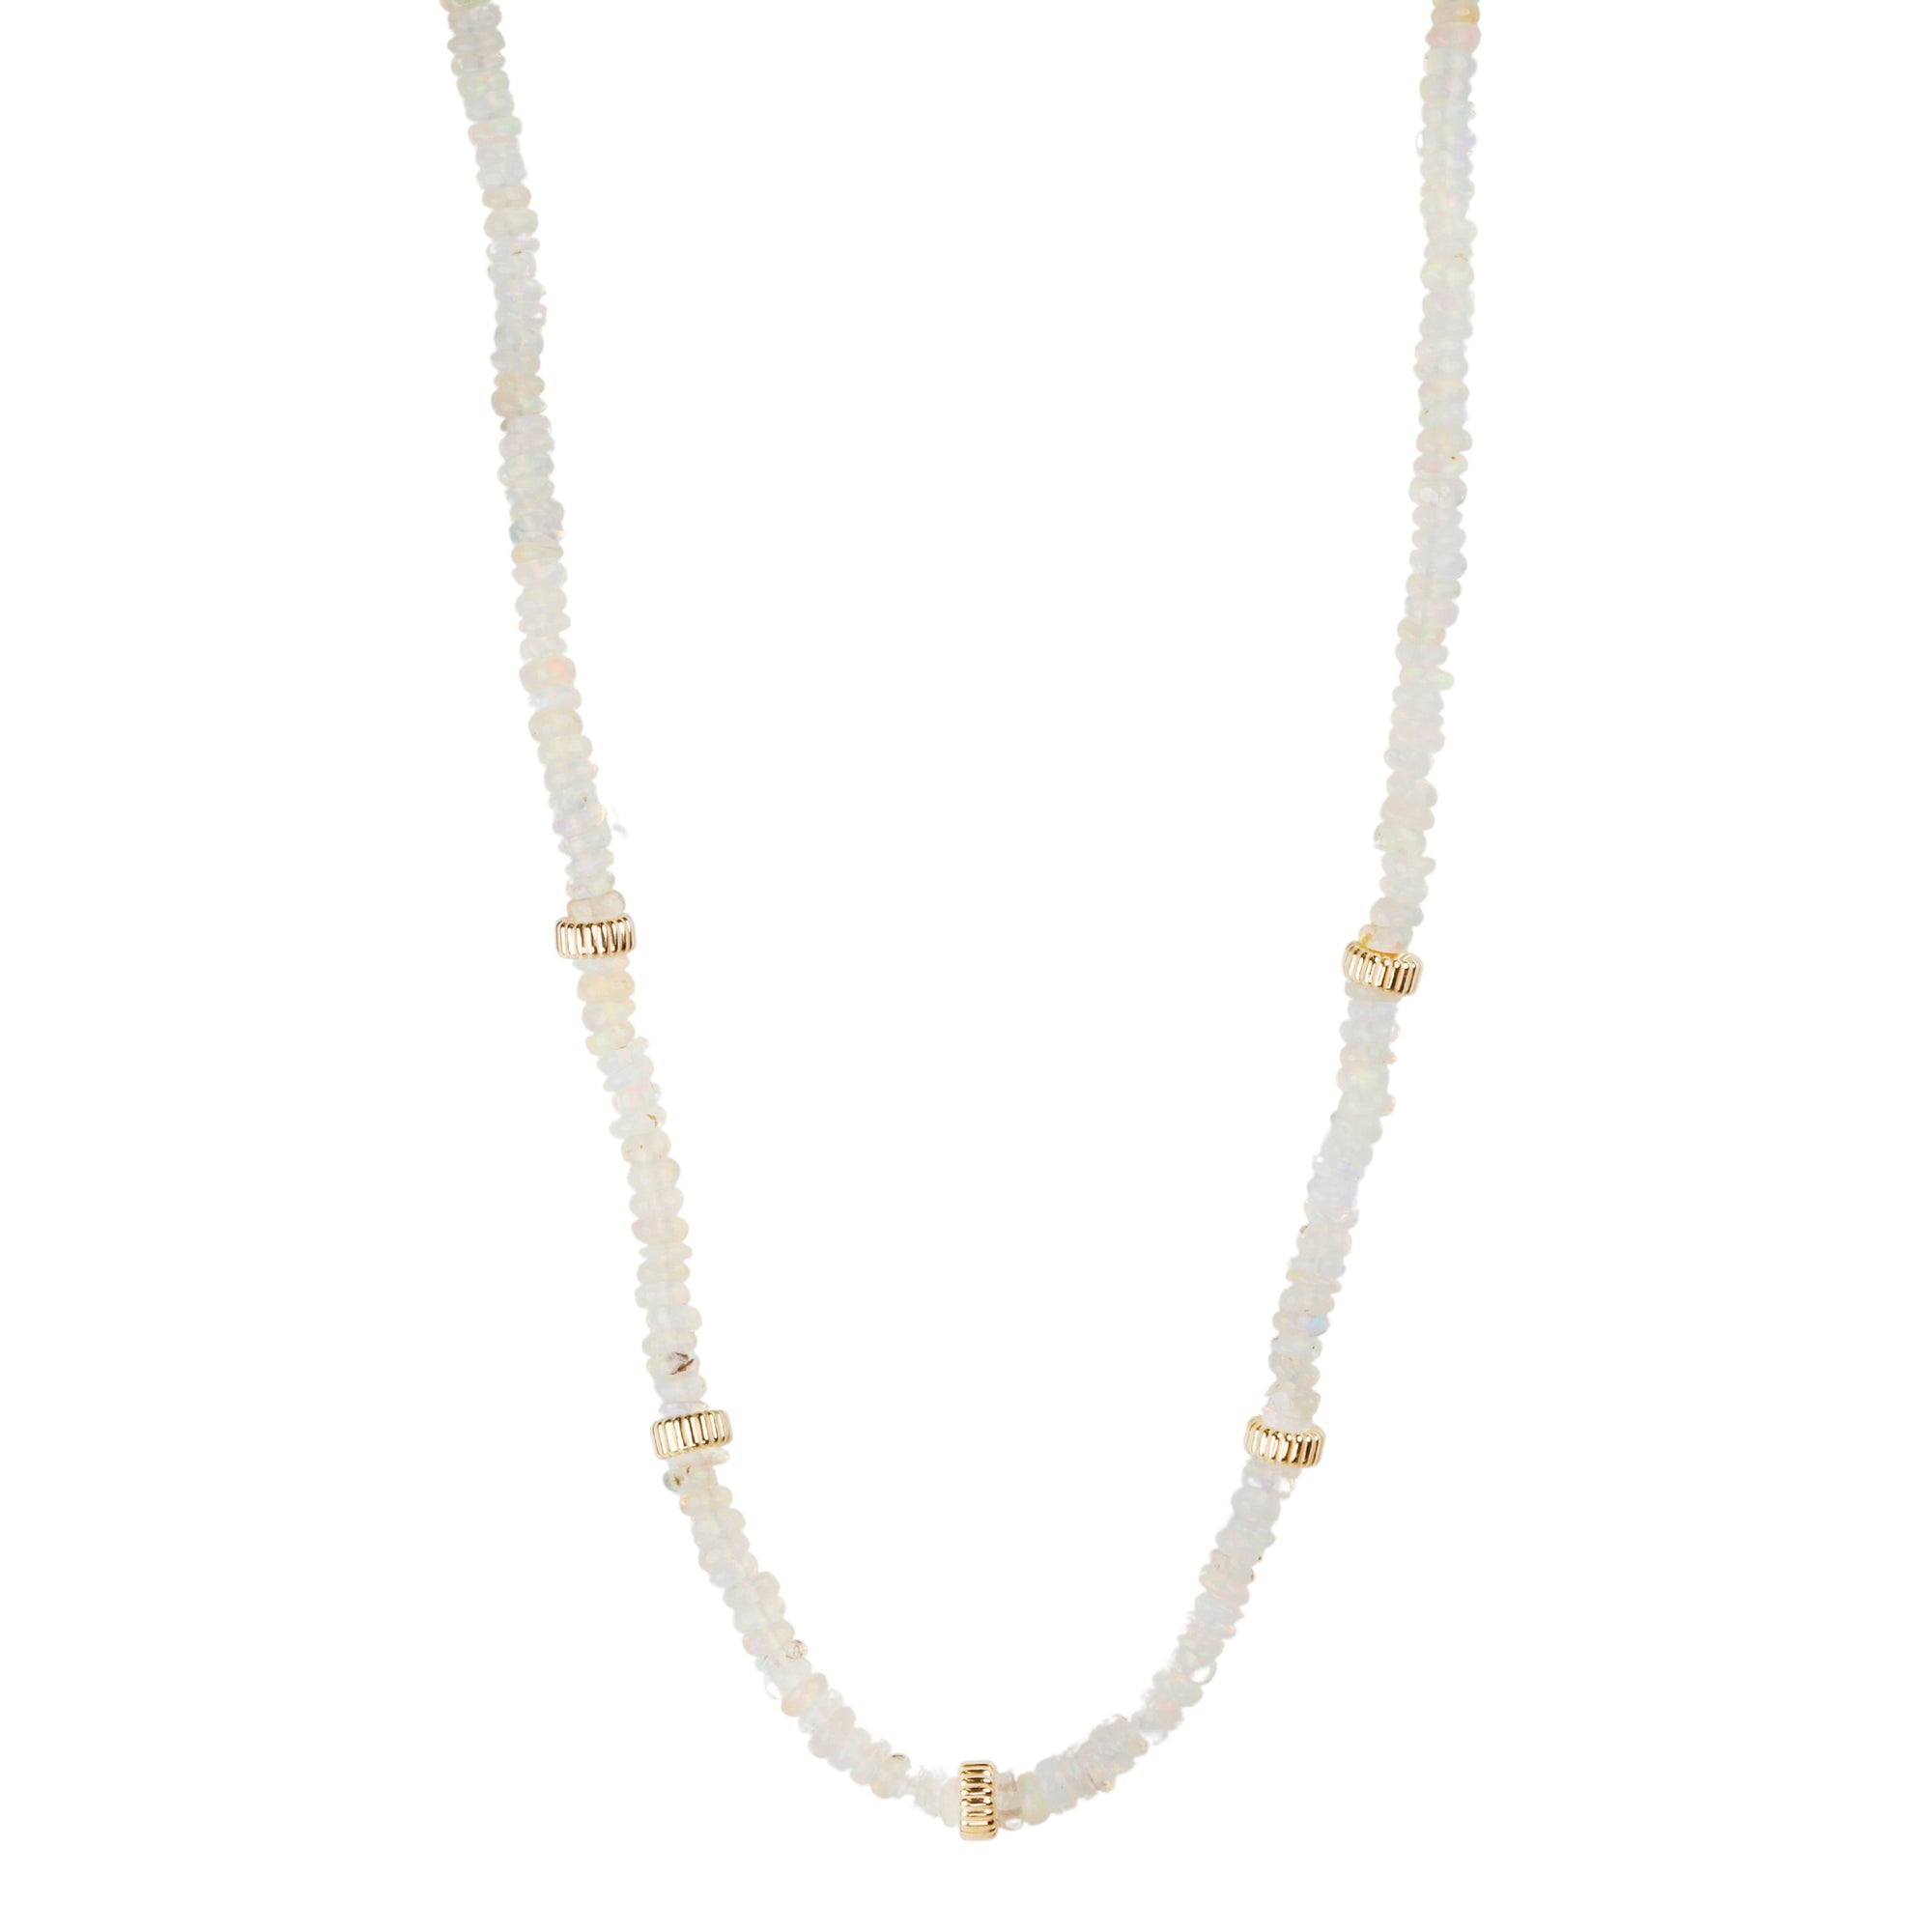 Fire Opal Rondelle Beaded Necklace